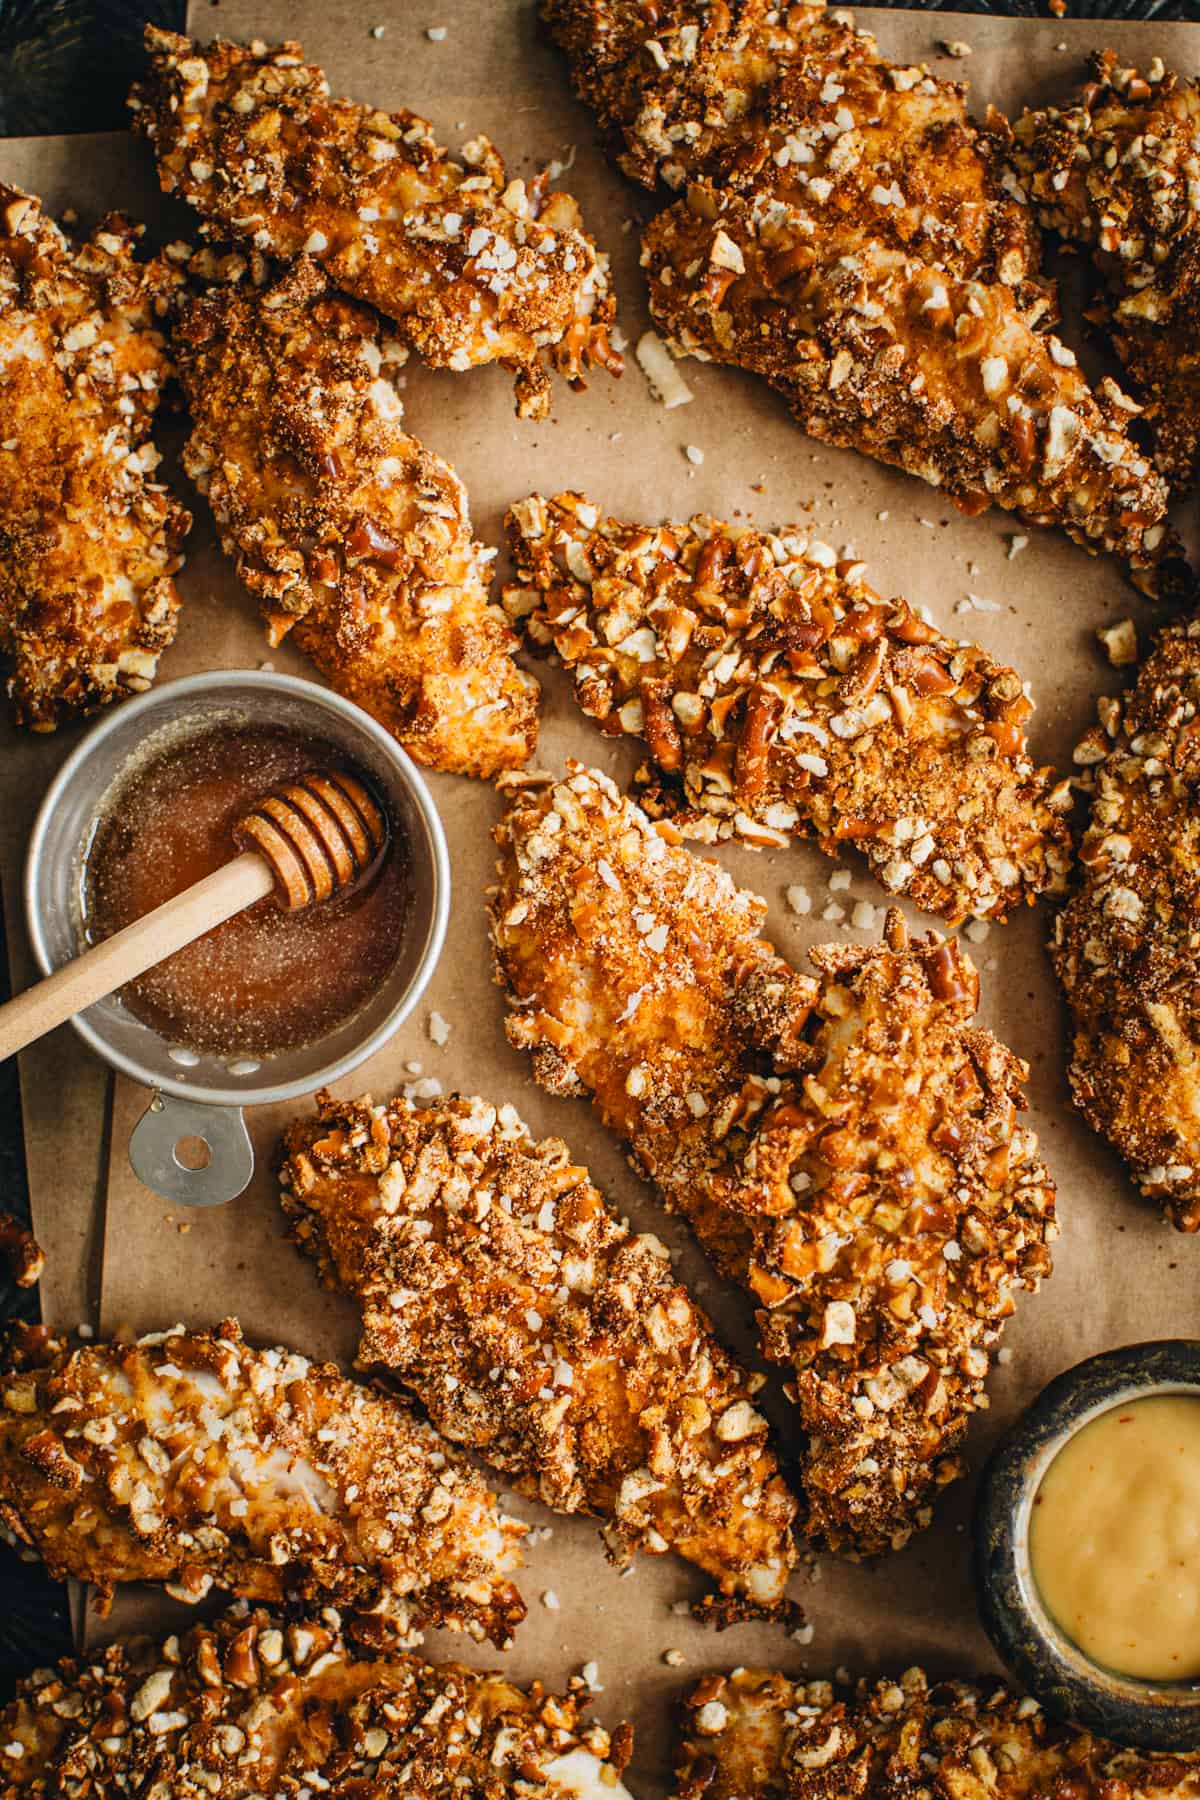 Pretzel crusted chicken with a honey dipping sauce.